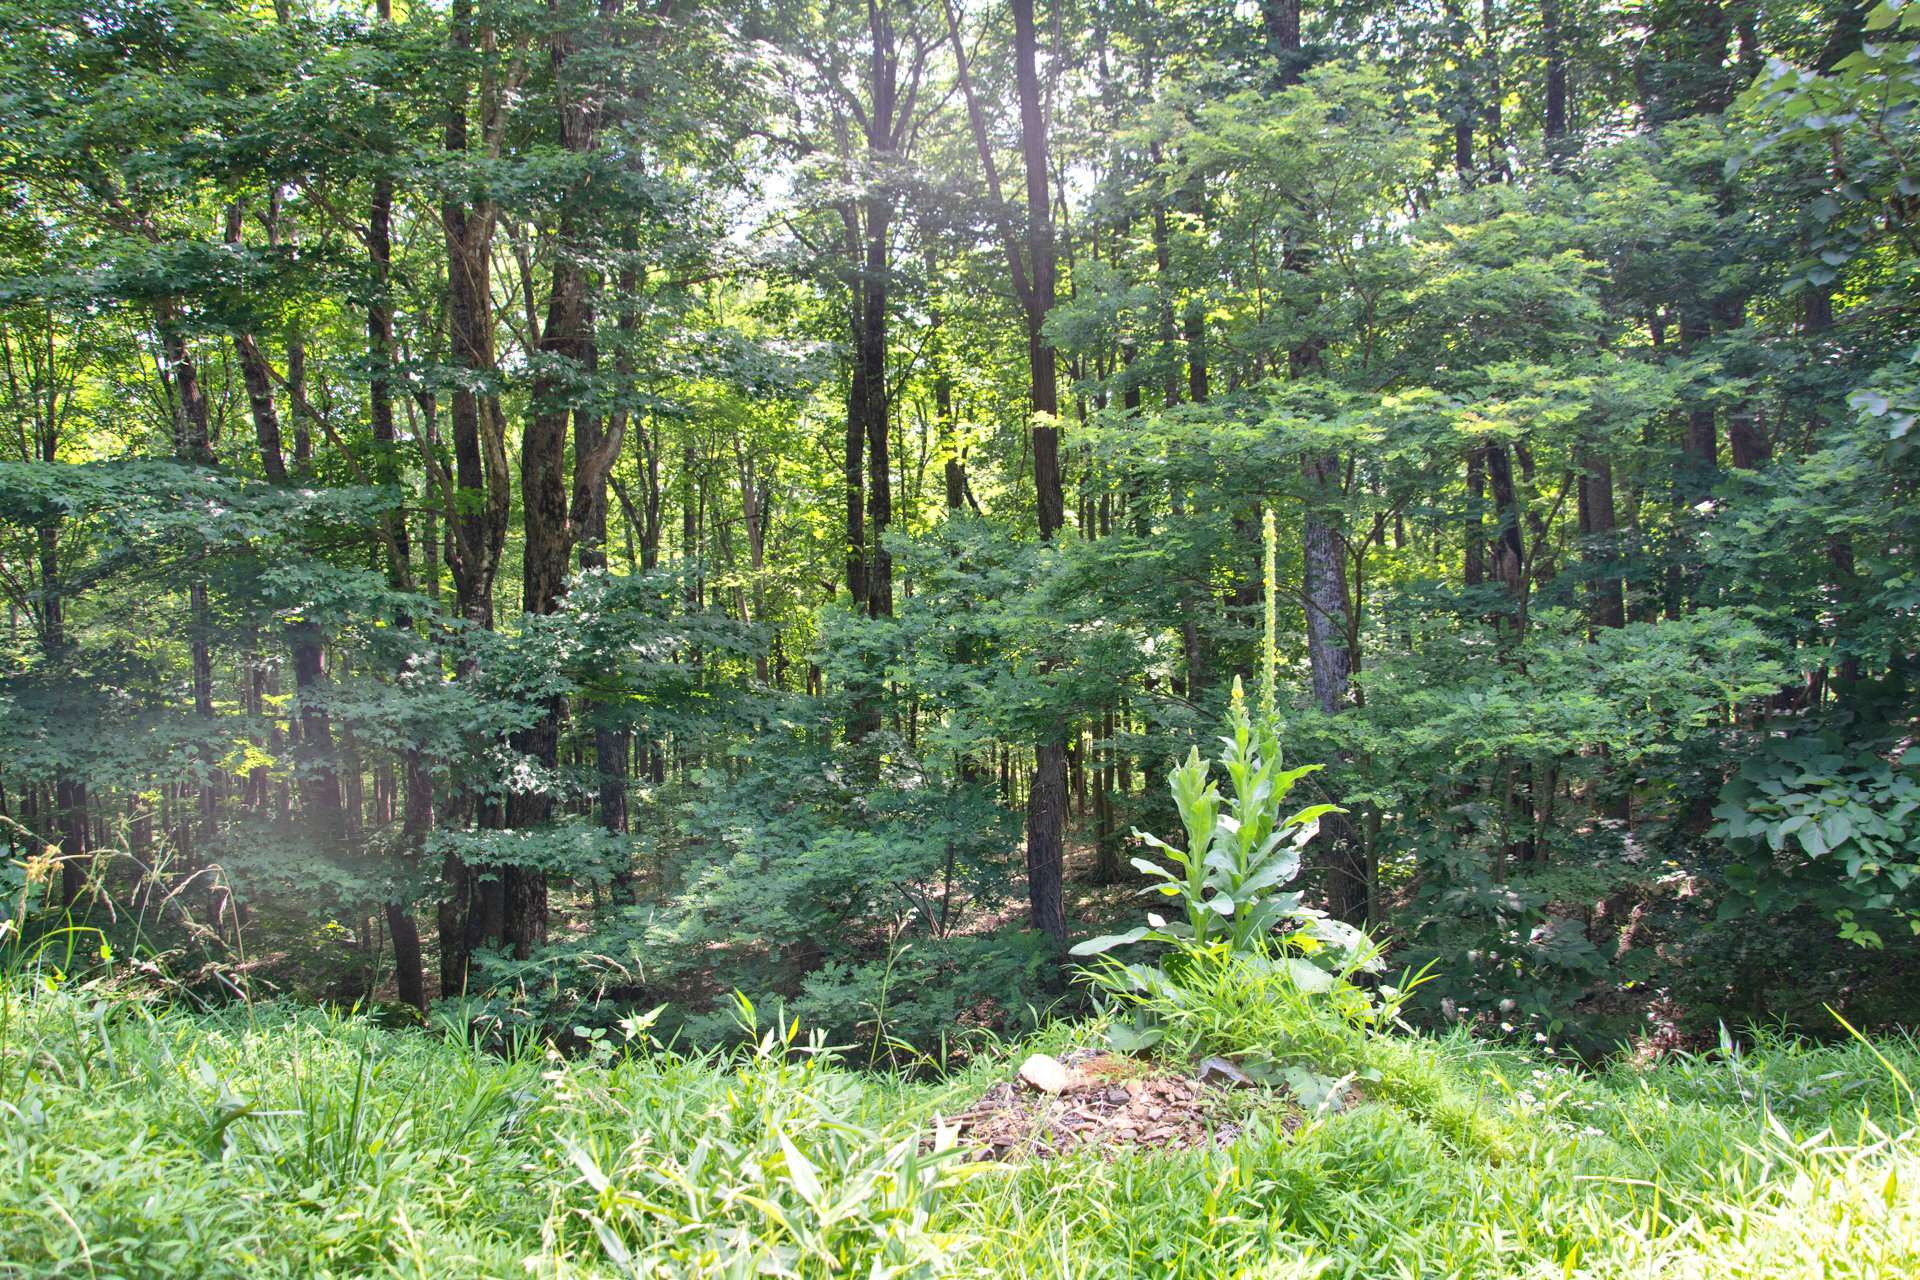 Lot 42 would be a great option for the construction of your Blue Ridge Mountain log cabin retreat.